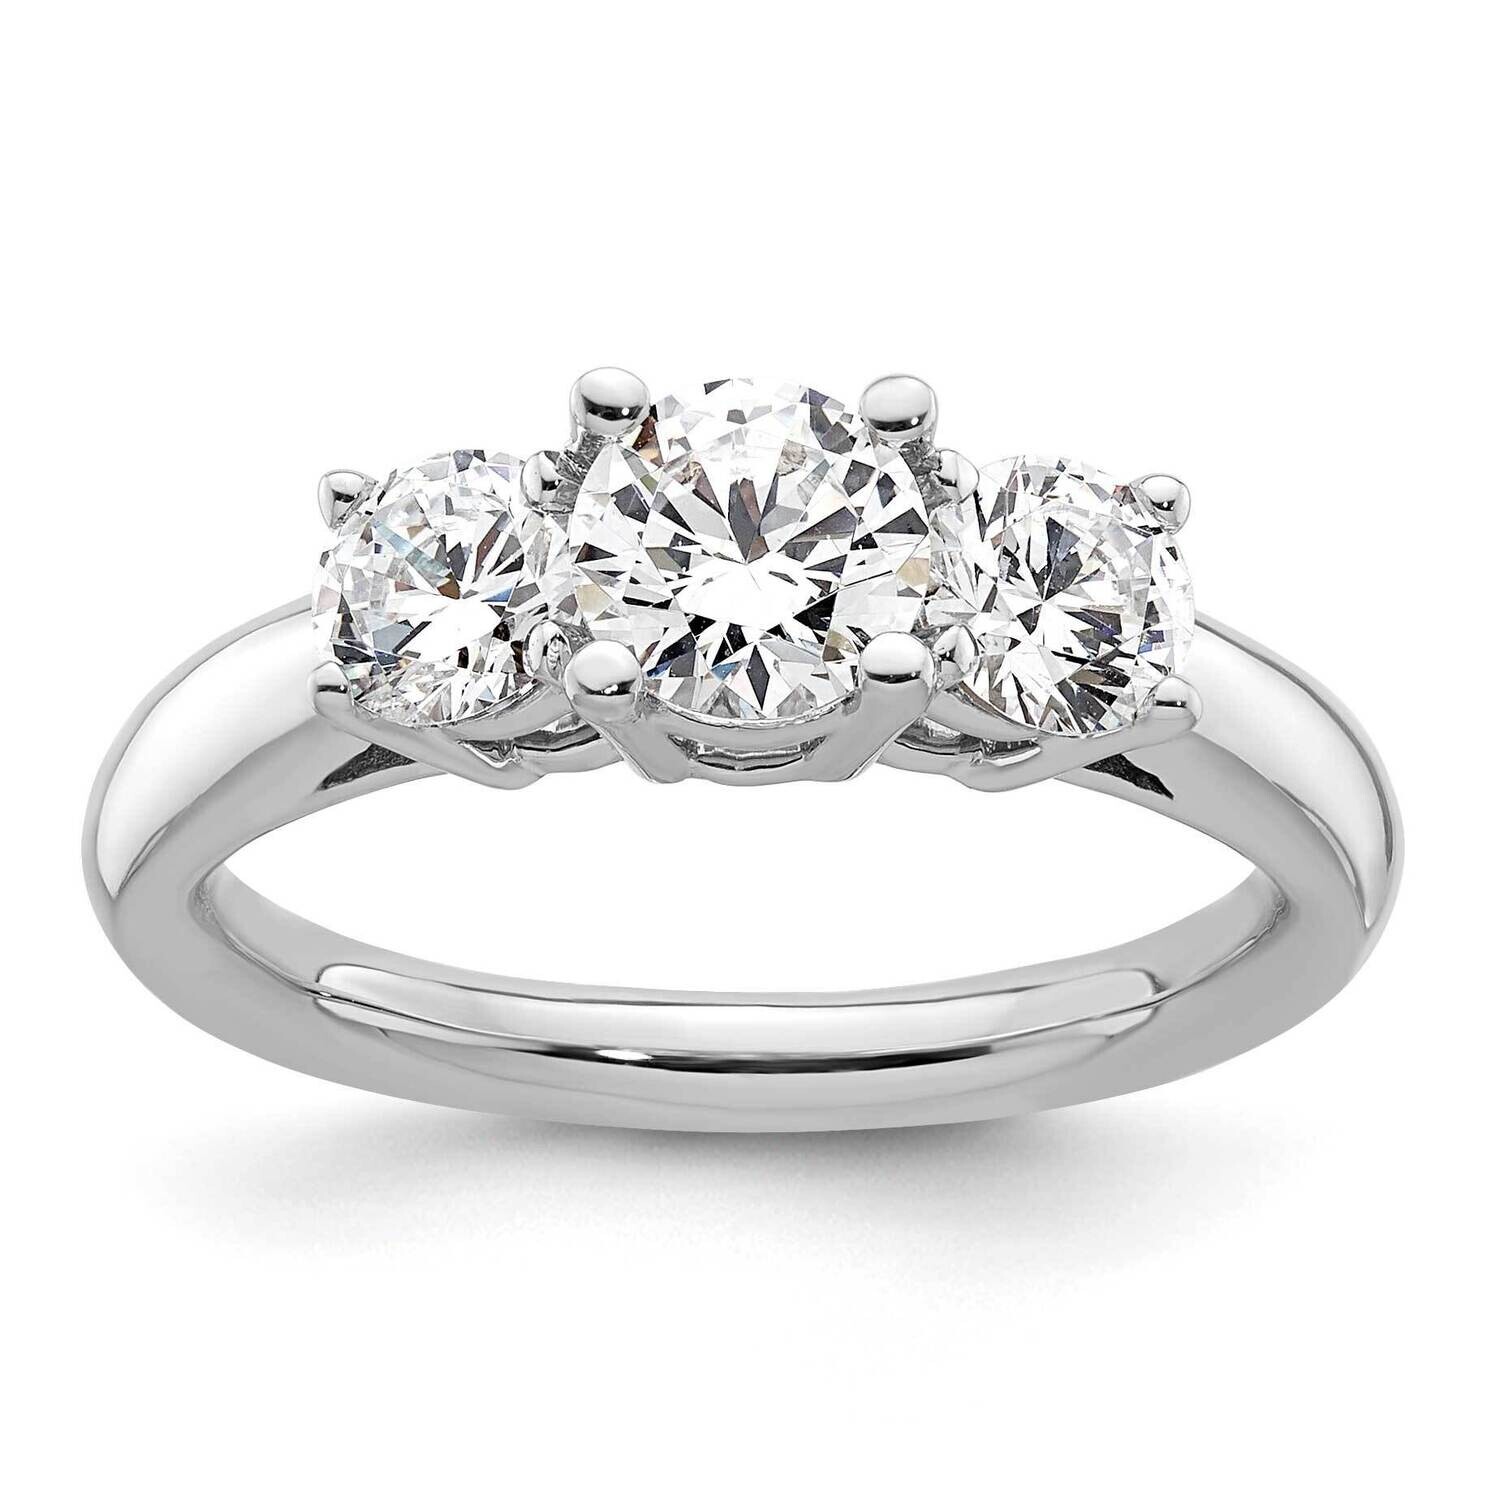 3-Stone Holds 3/4 Carat 5.8mm Round Center 2-4.6mm Round Sides Engagement Ring Mounting 14k White Gold RM2950E-075-CWAA